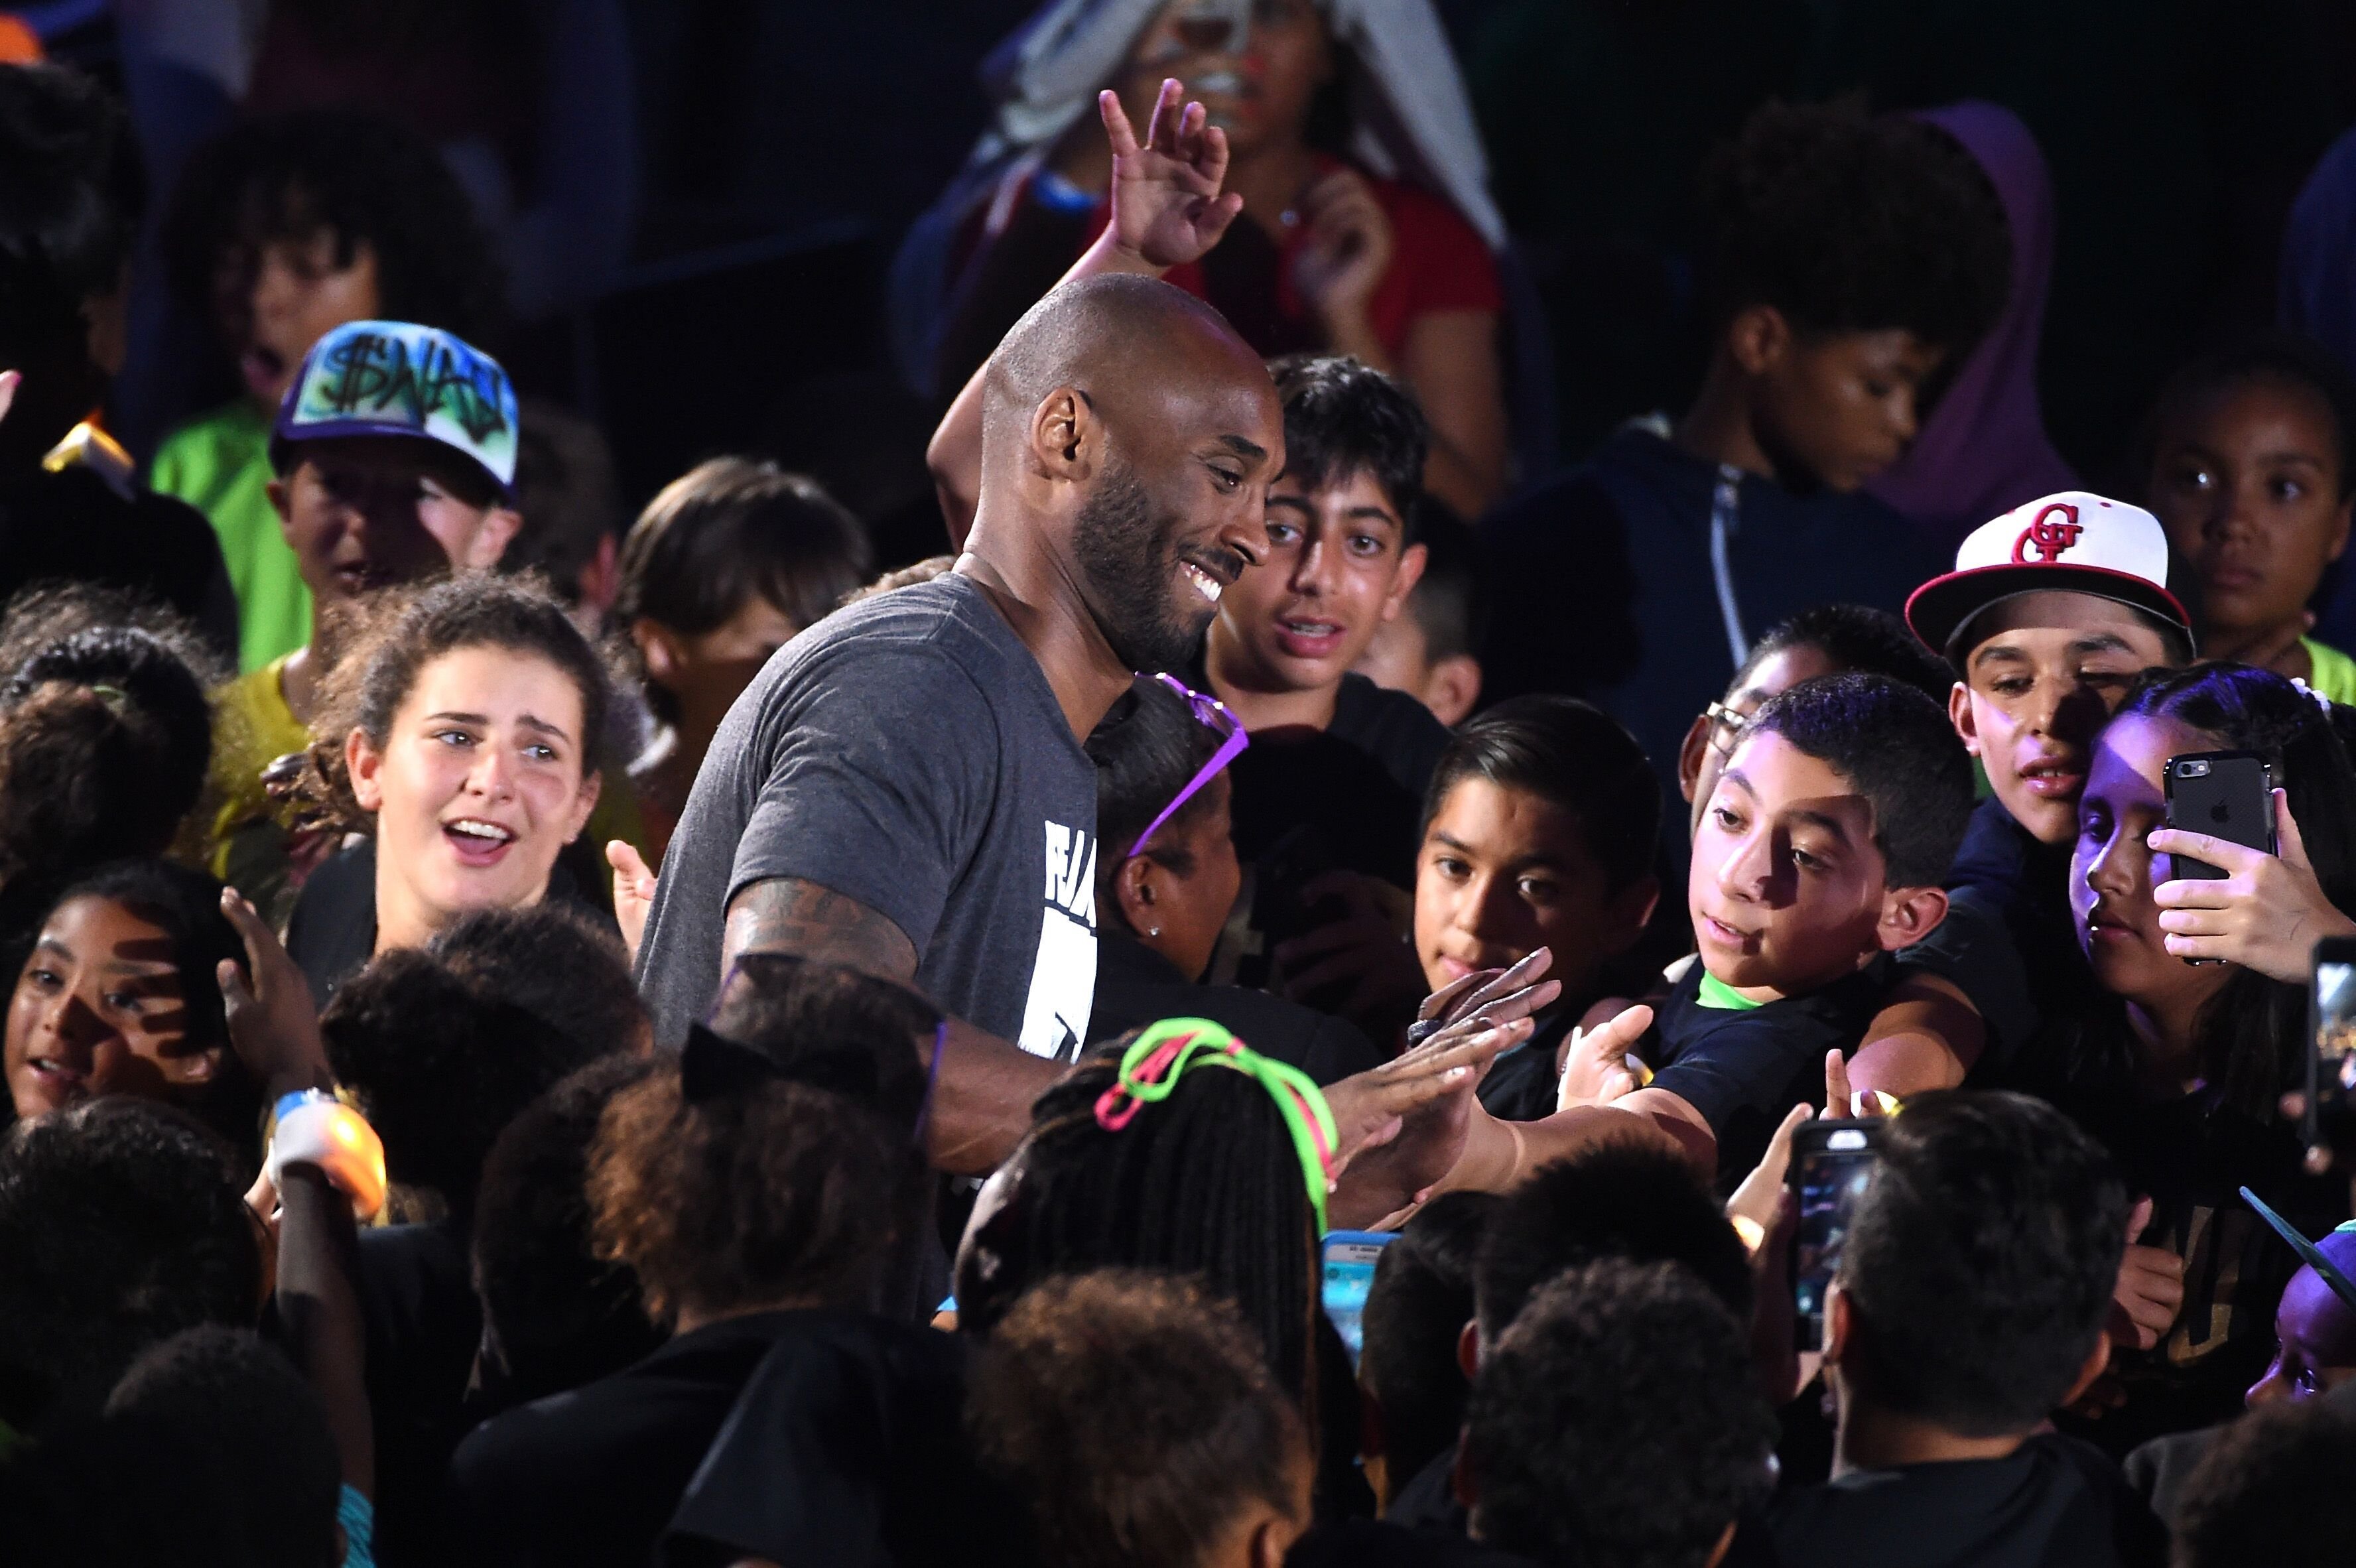 Kobe Bryant amongst a sea of his fans | Source: Getty Images/GlobalImagesUkraine